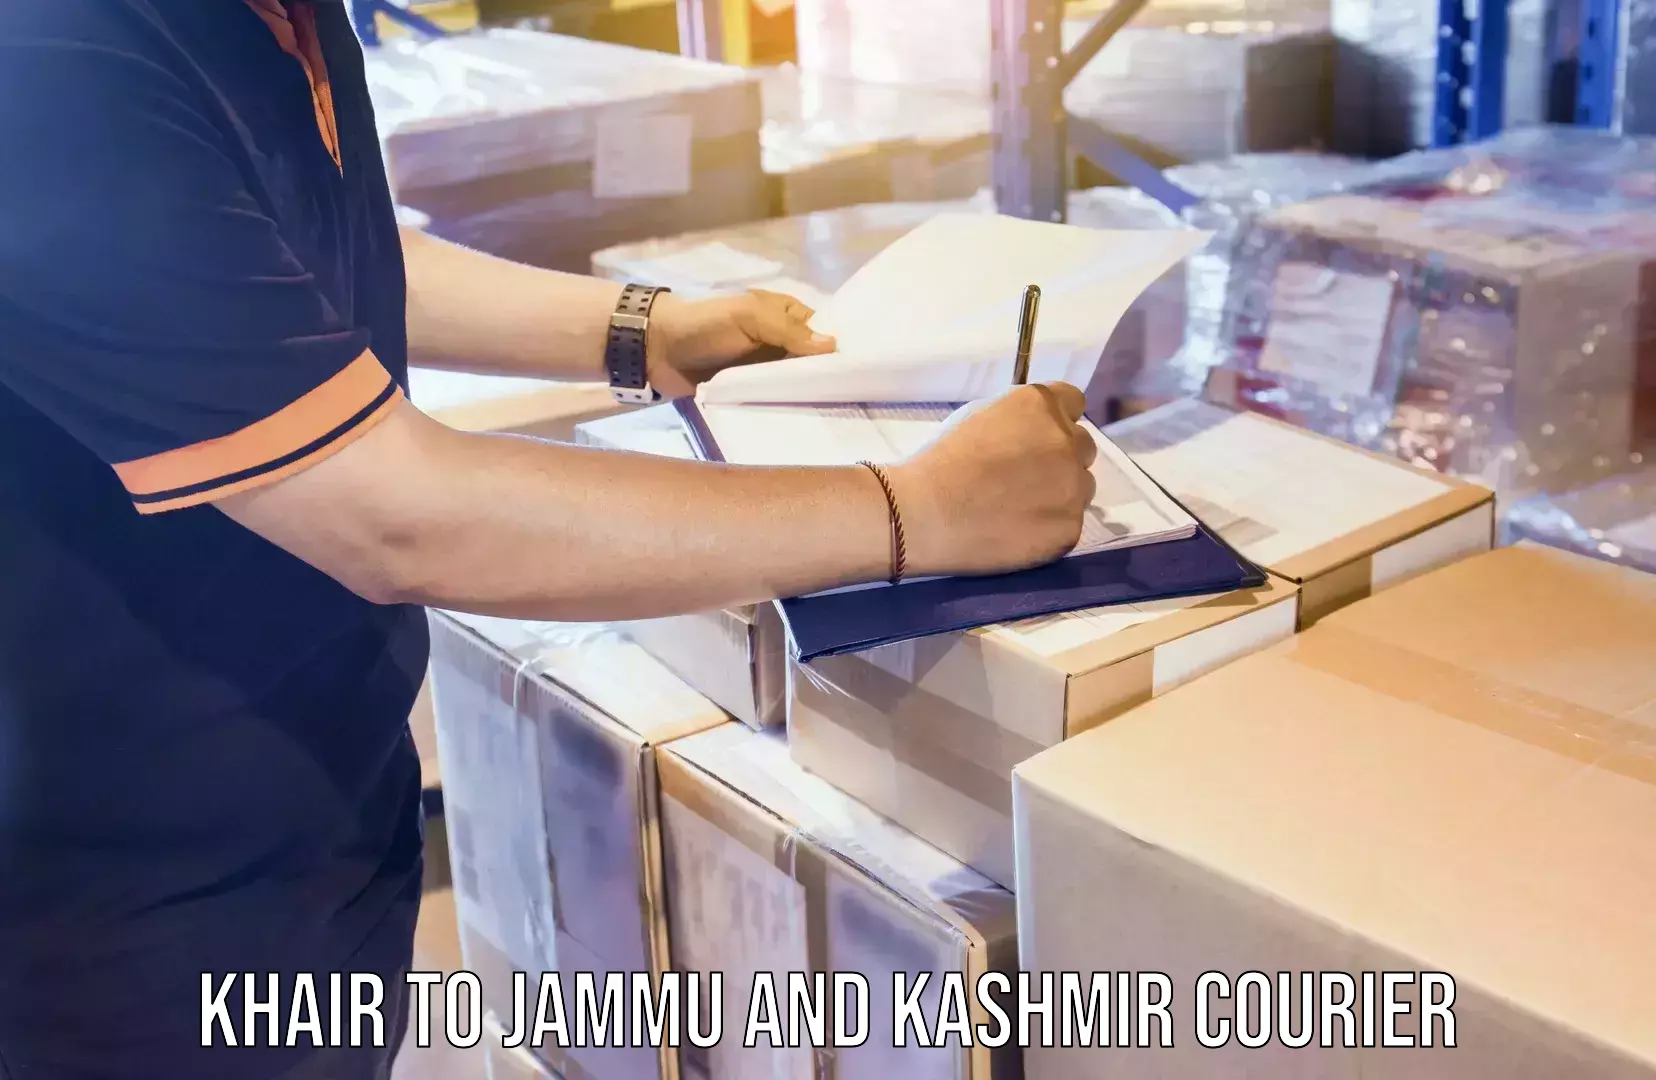 Hassle-free relocation Khair to Jammu and Kashmir